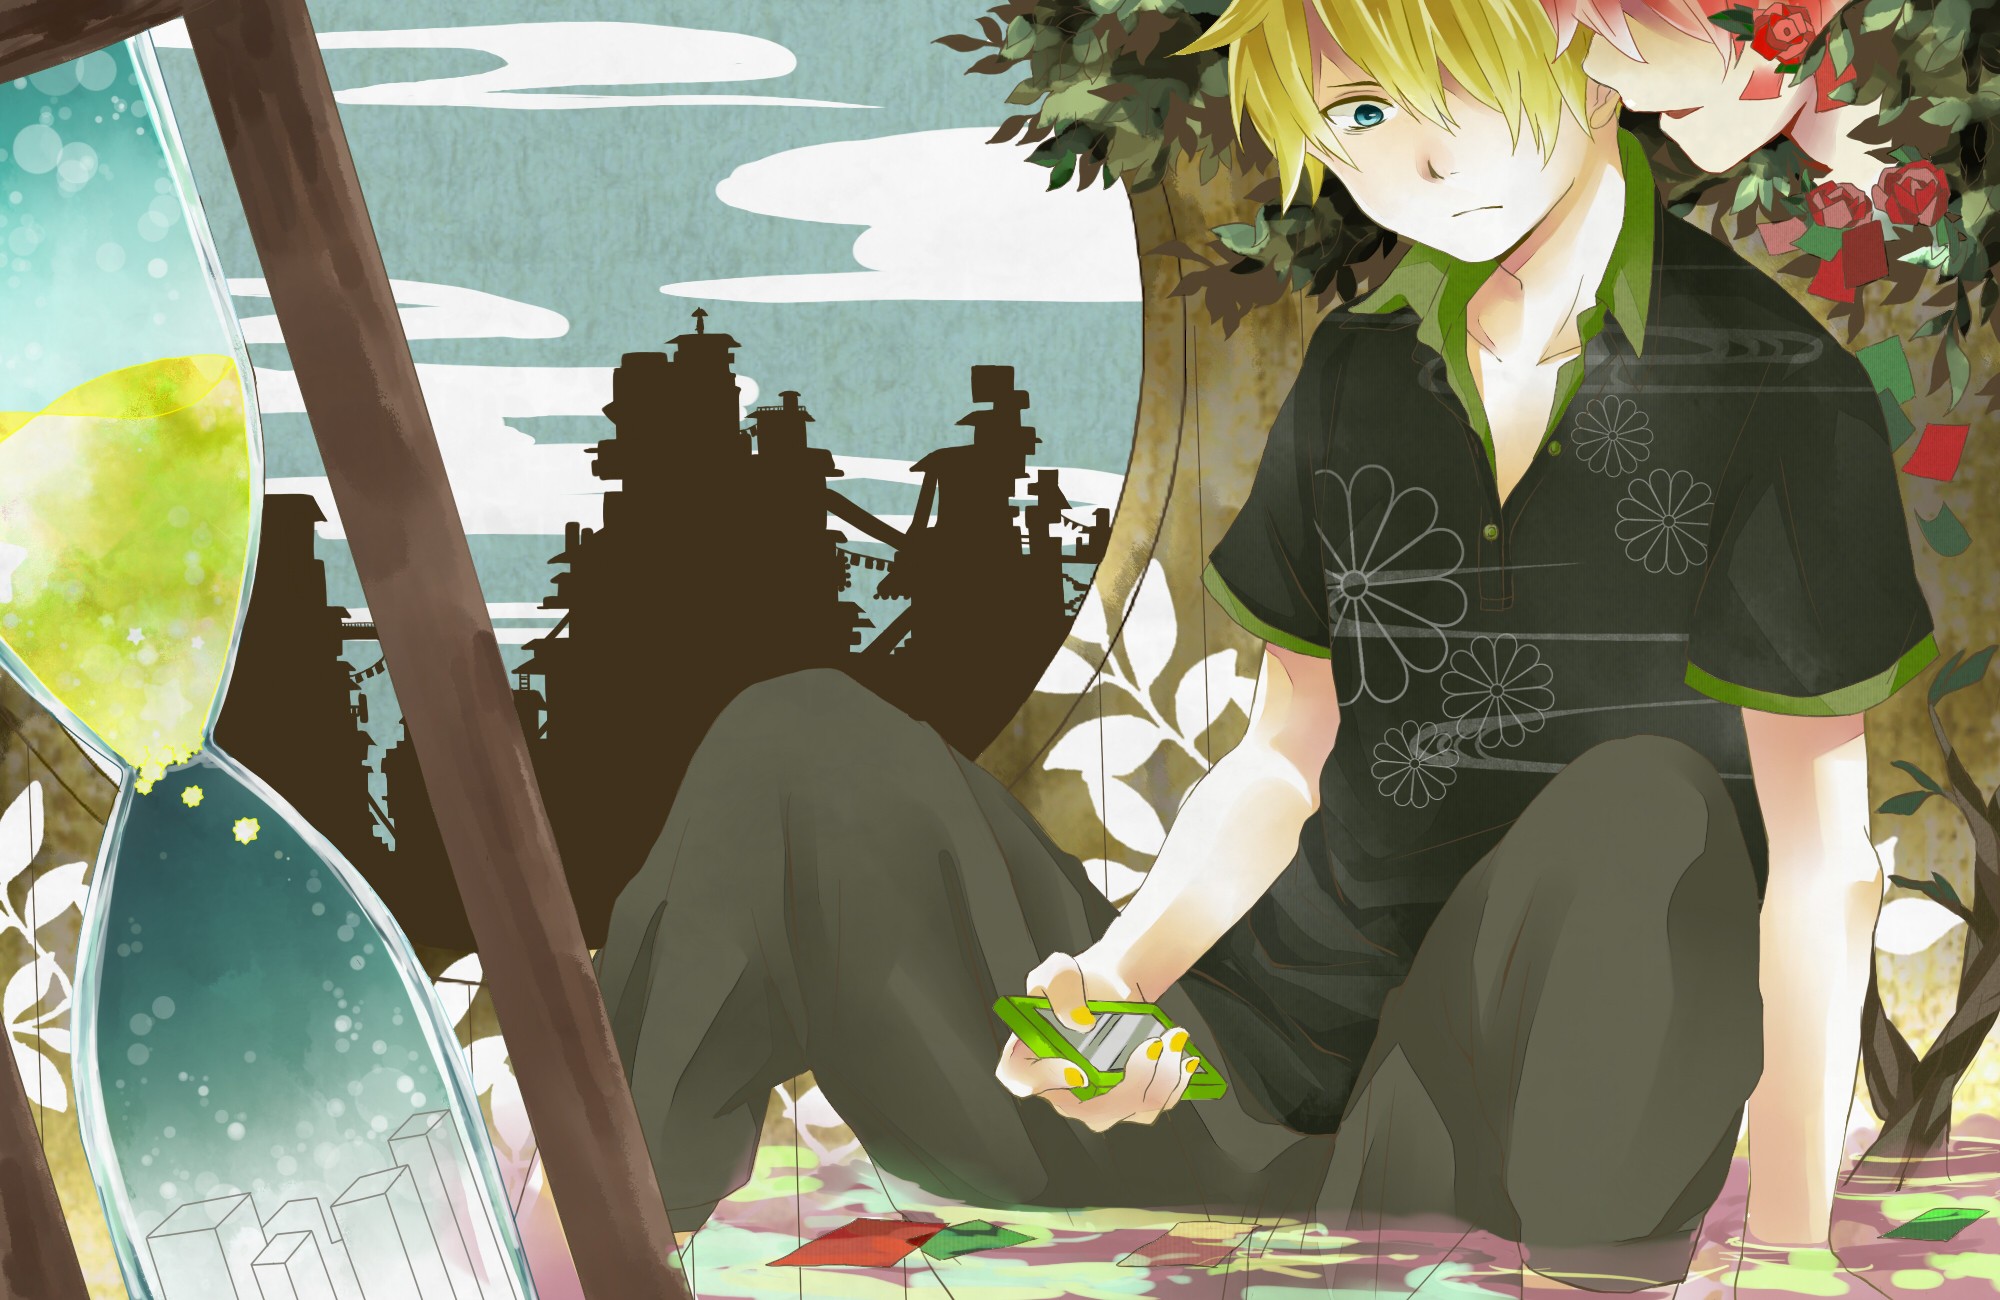 blondes, Water, Pants, Clouds, Paper, Trees, Vocaloid, Flowers, Blue, Eyes, Houses, Kagamine, Len, Pink, Hair, Shirts, Cellphones, Sitting, Anime, Boys, Roses, Sandglass Wallpaper